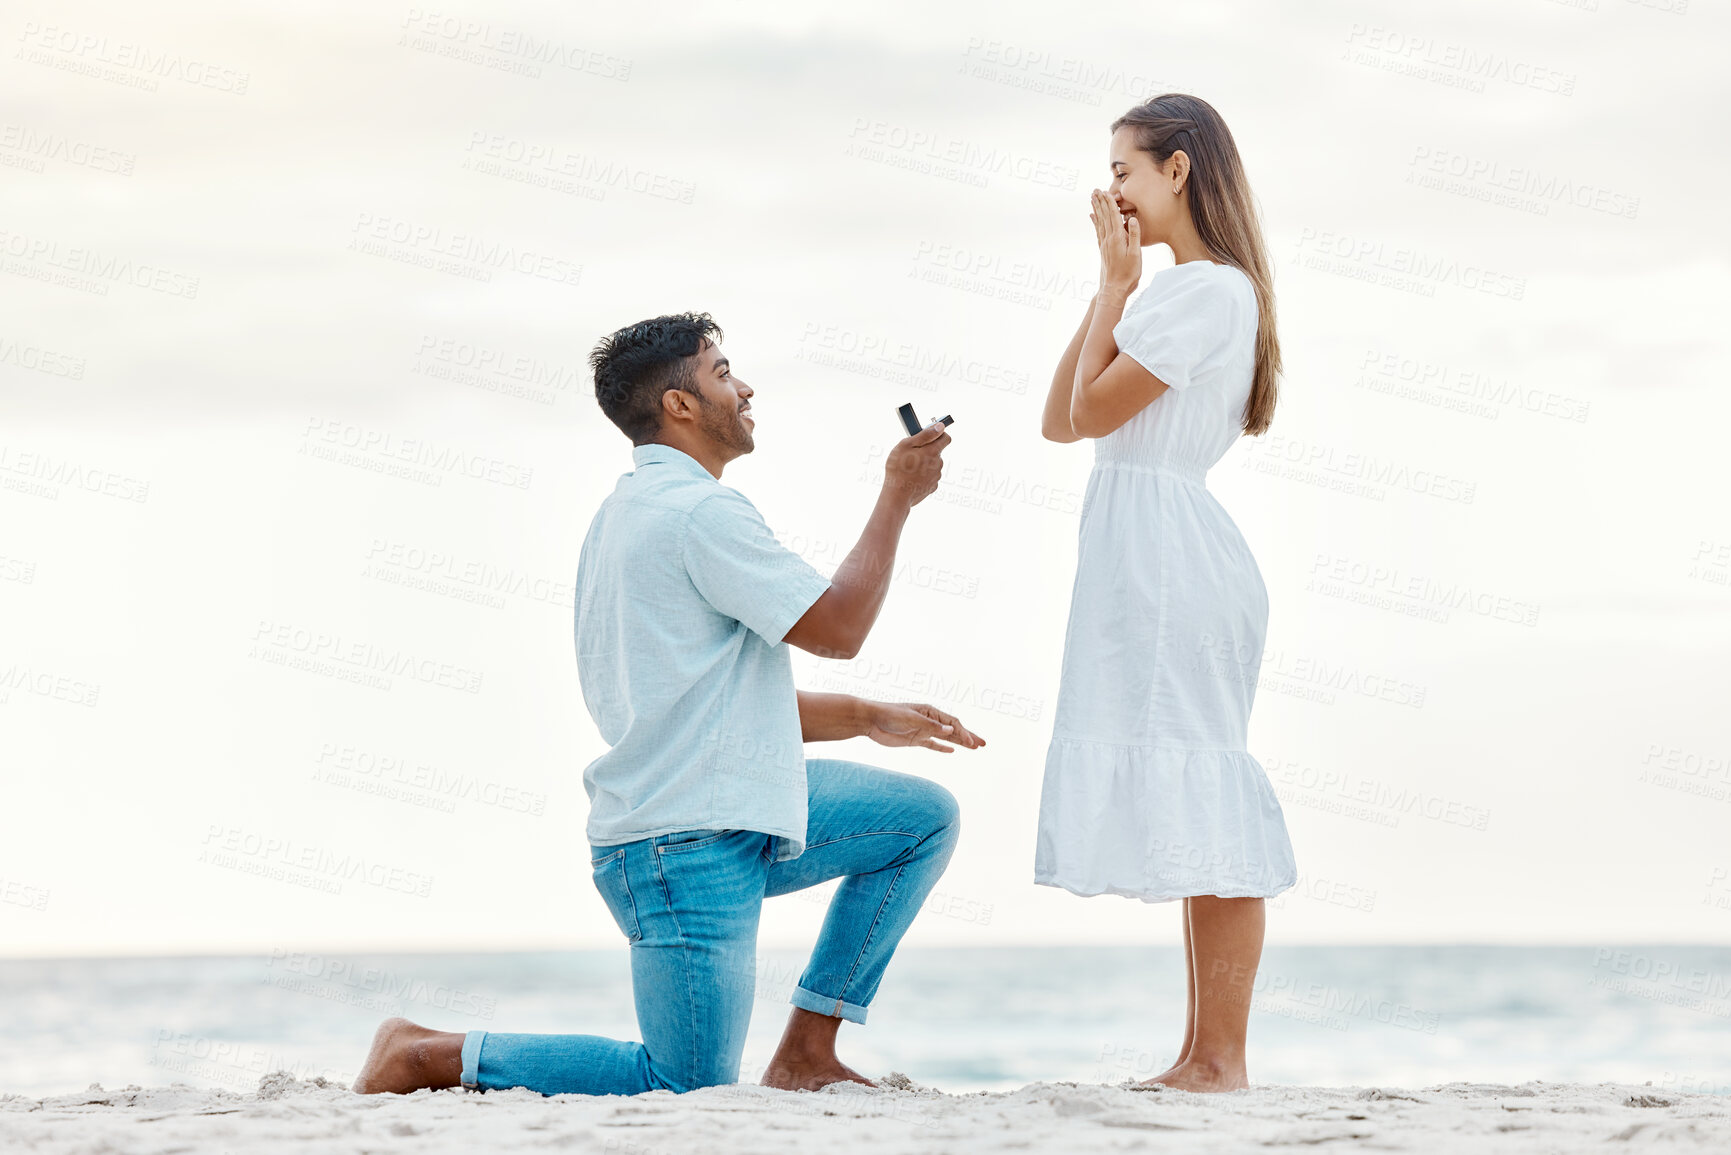 Buy stock photo Engagement, beach and a couple with a marriage proposal with a ring while on romantic vacation. Love, romance and happy couple getting engaged while on a summer holiday in nature by the ocean.